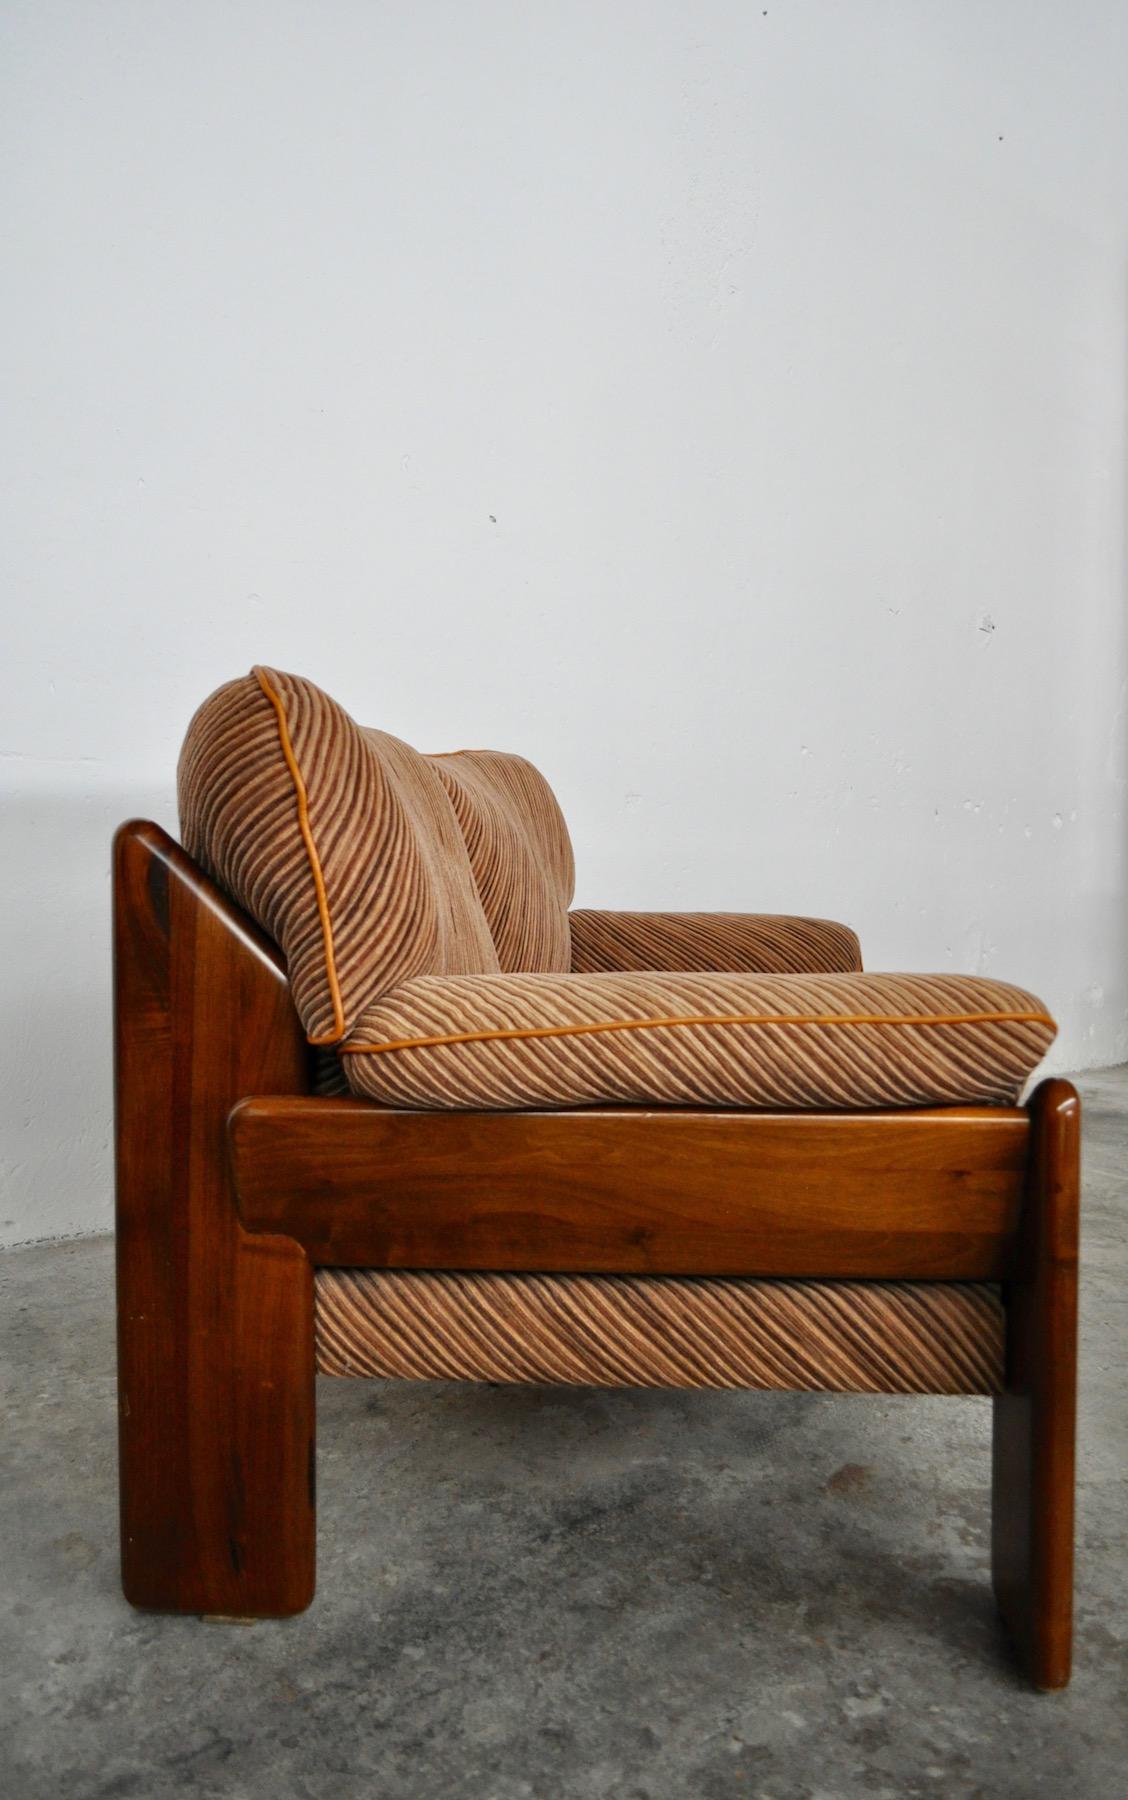 Sofa and Armchairs in Walnut Wood by Mobil Girgi, 1970s For Sale 5